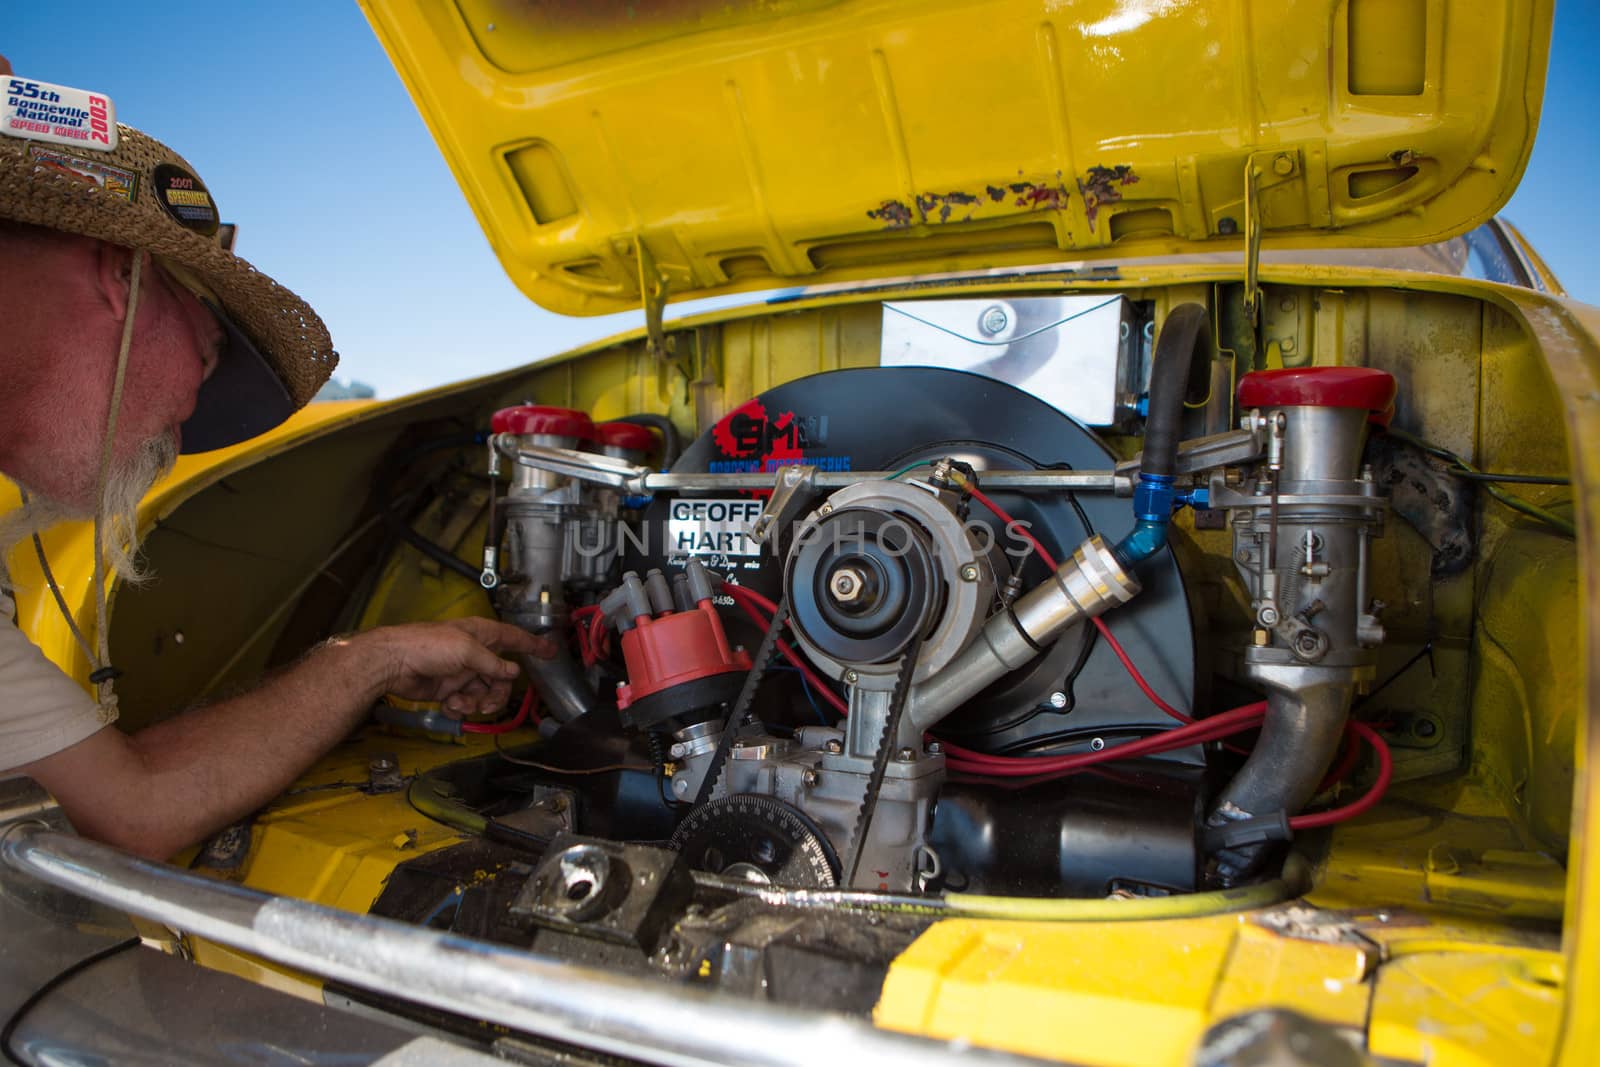 SALT LAKE, UT - SEPTEMBER 8: An unidentified man showing the engine parts of his speed yellow car during the World of Speed at Bonneville Salt Flats Recreation Area Utah USA.